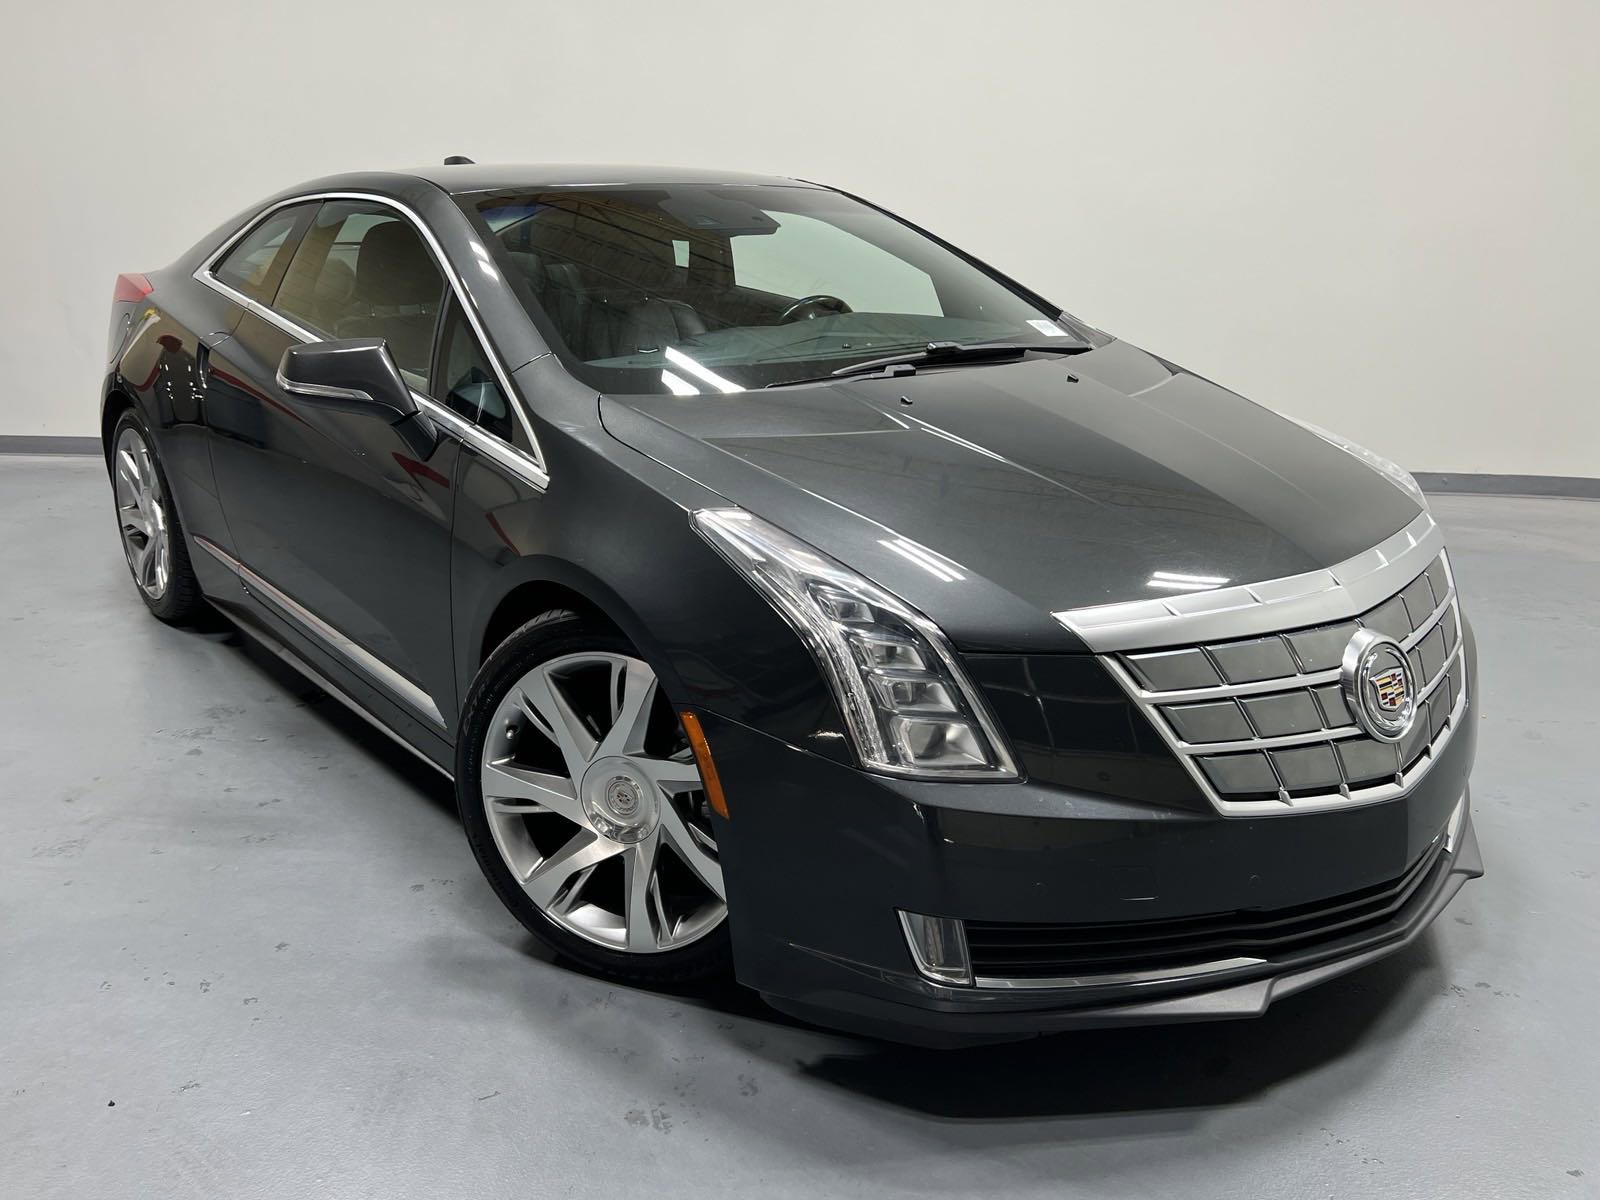 Pre-Owned 2014 Cadillac ELR 2dr Cpe Coupe in Cary #PS00234 | Hendrick Dodge  Cary